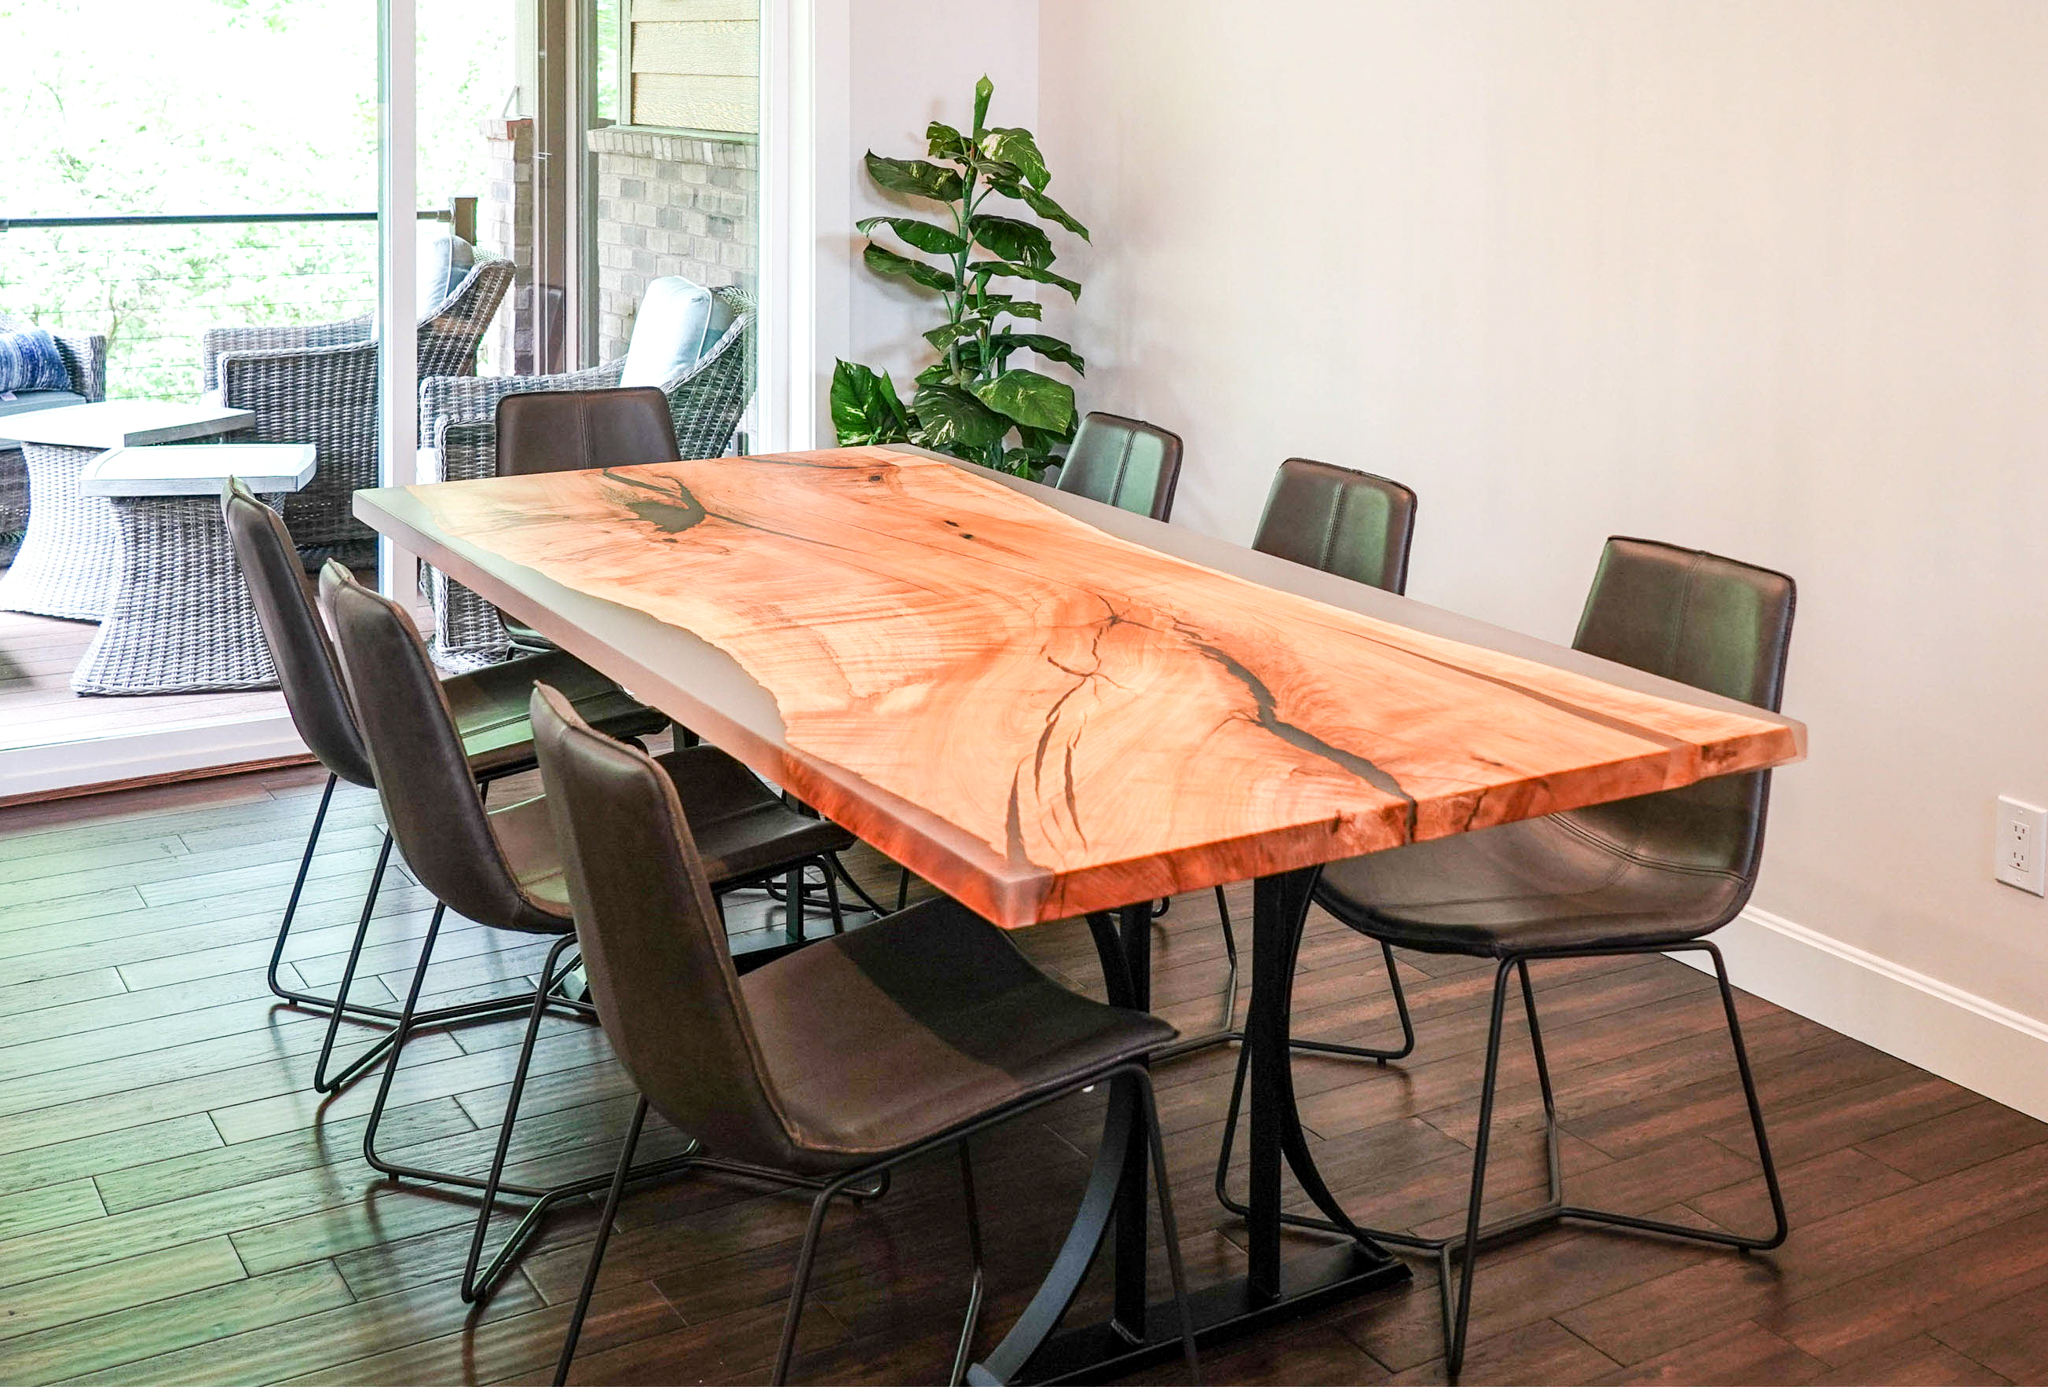 10 Ideas for Building Live Edge Wood Furniture